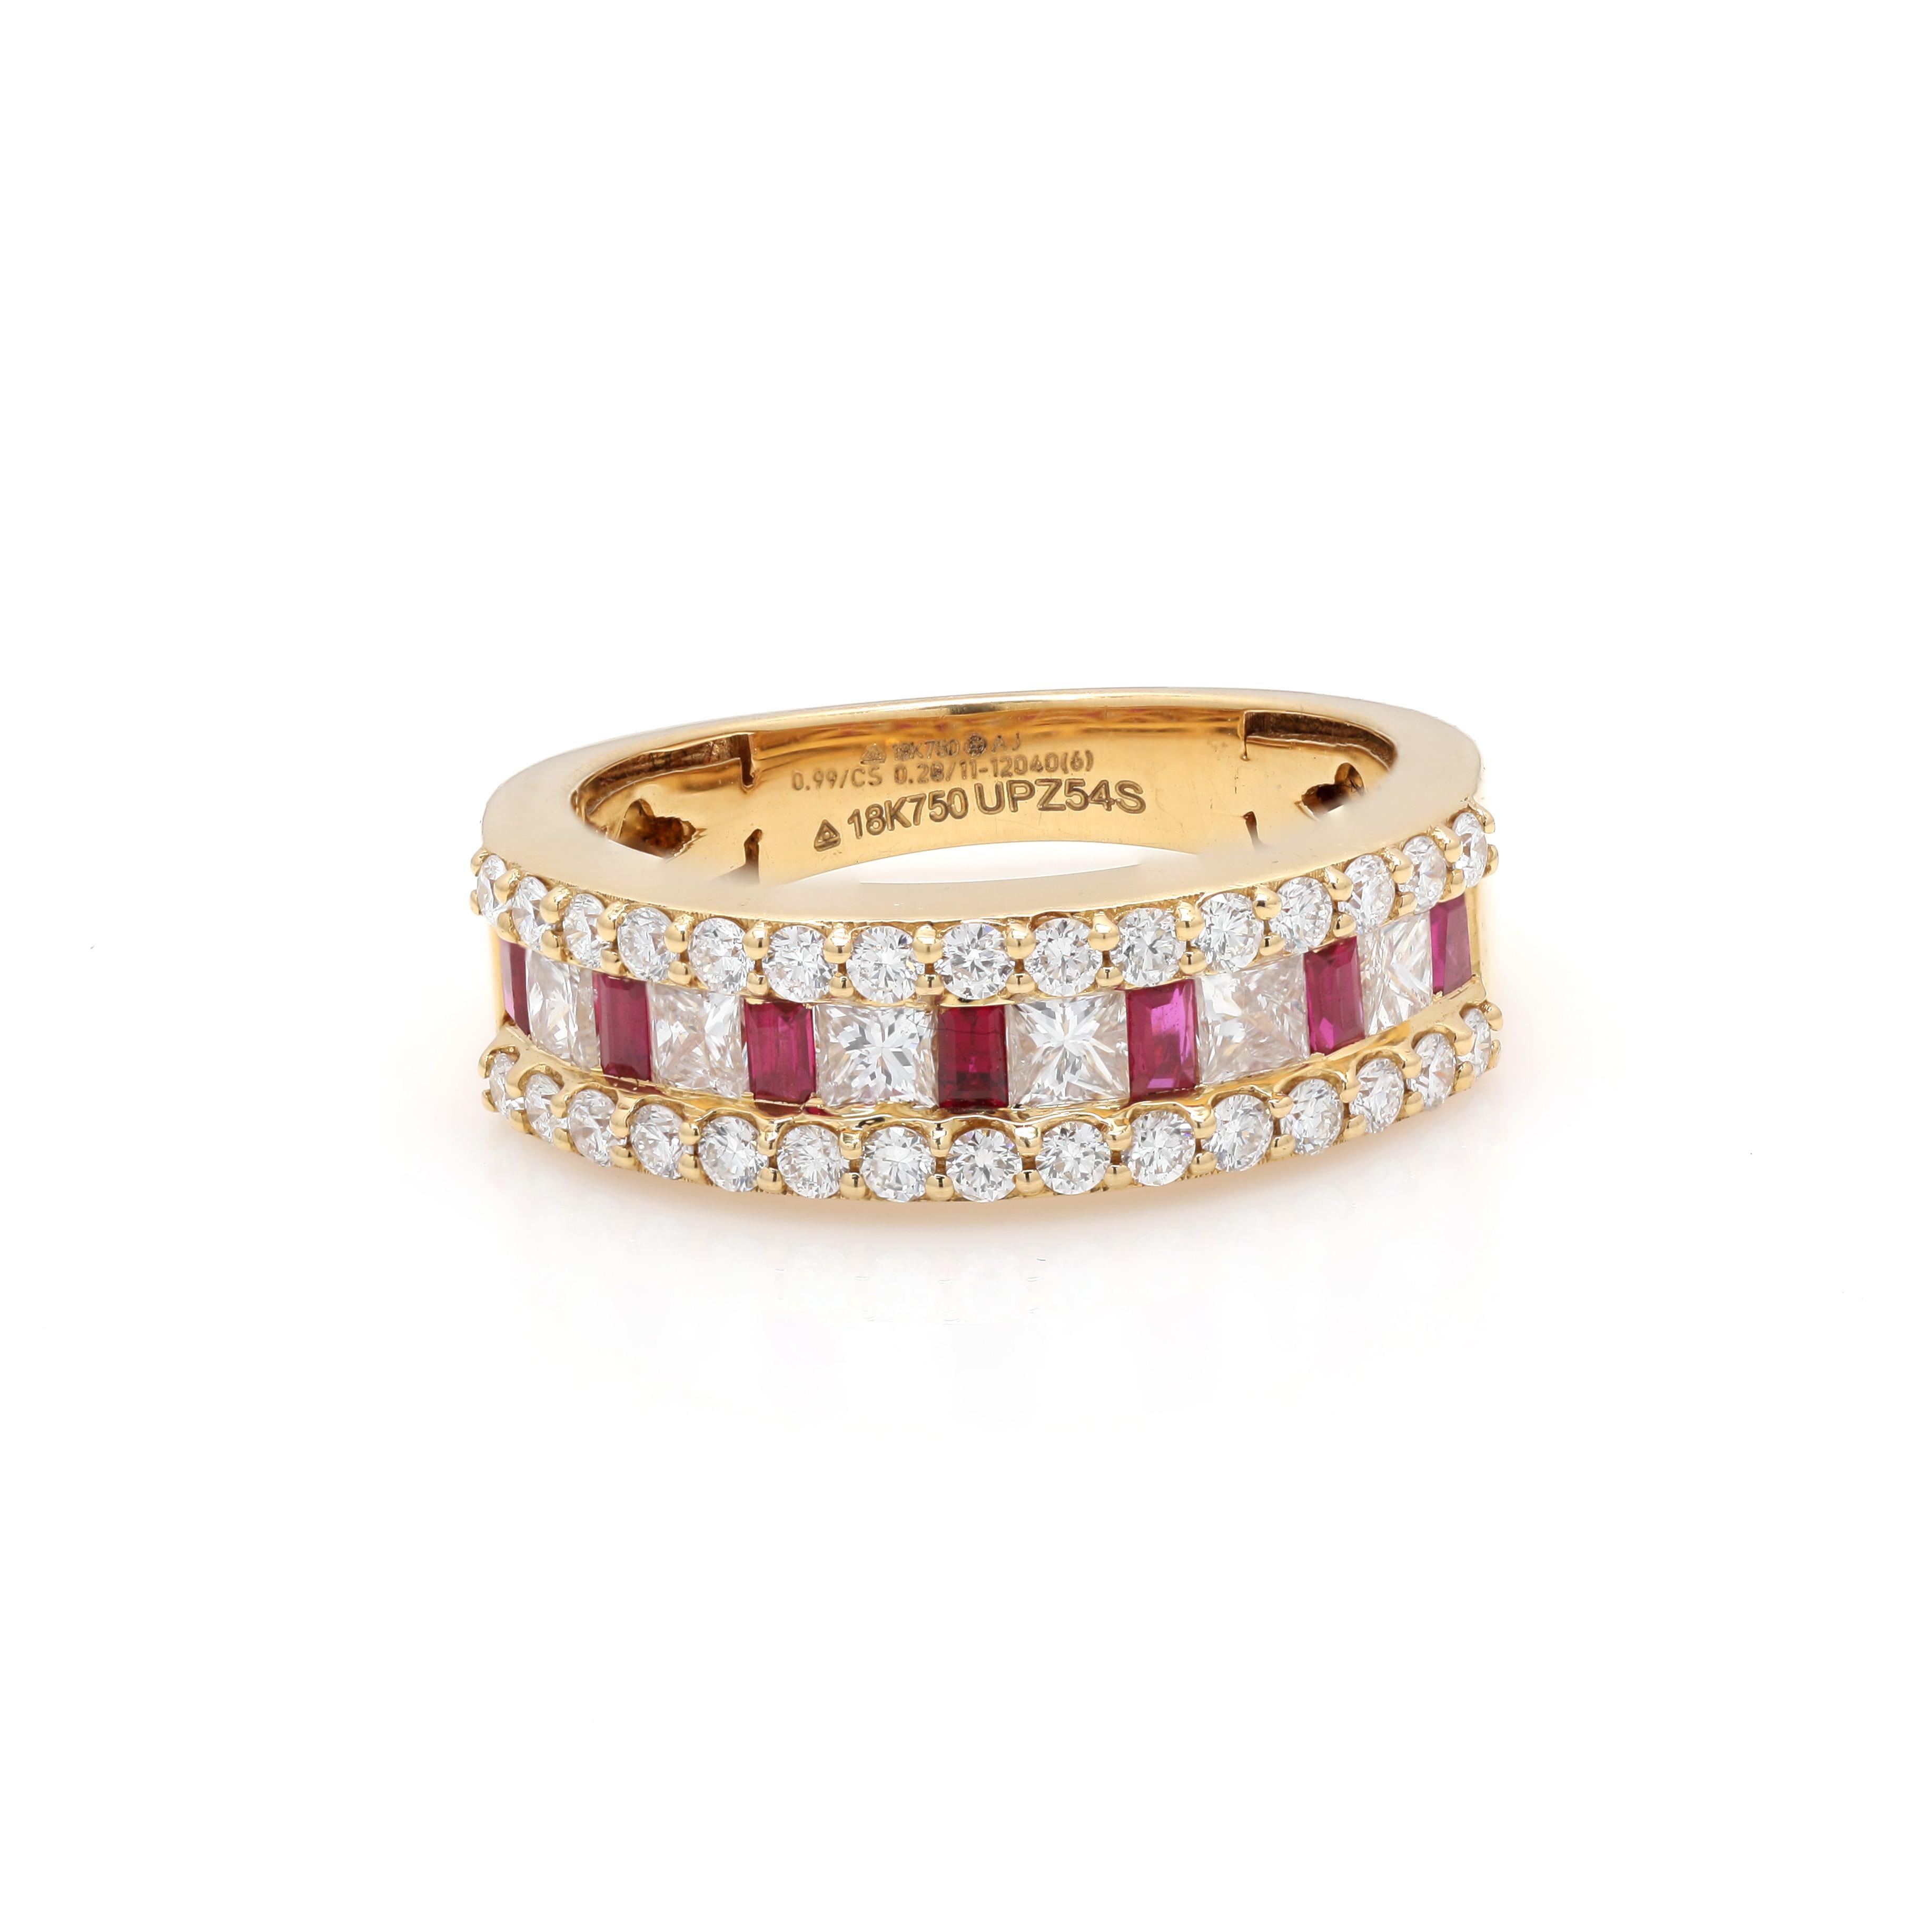 For Sale:  Stackable Half Eternity Ruby Engagement Ring in 18K Yellow Gold with Diamonds 3